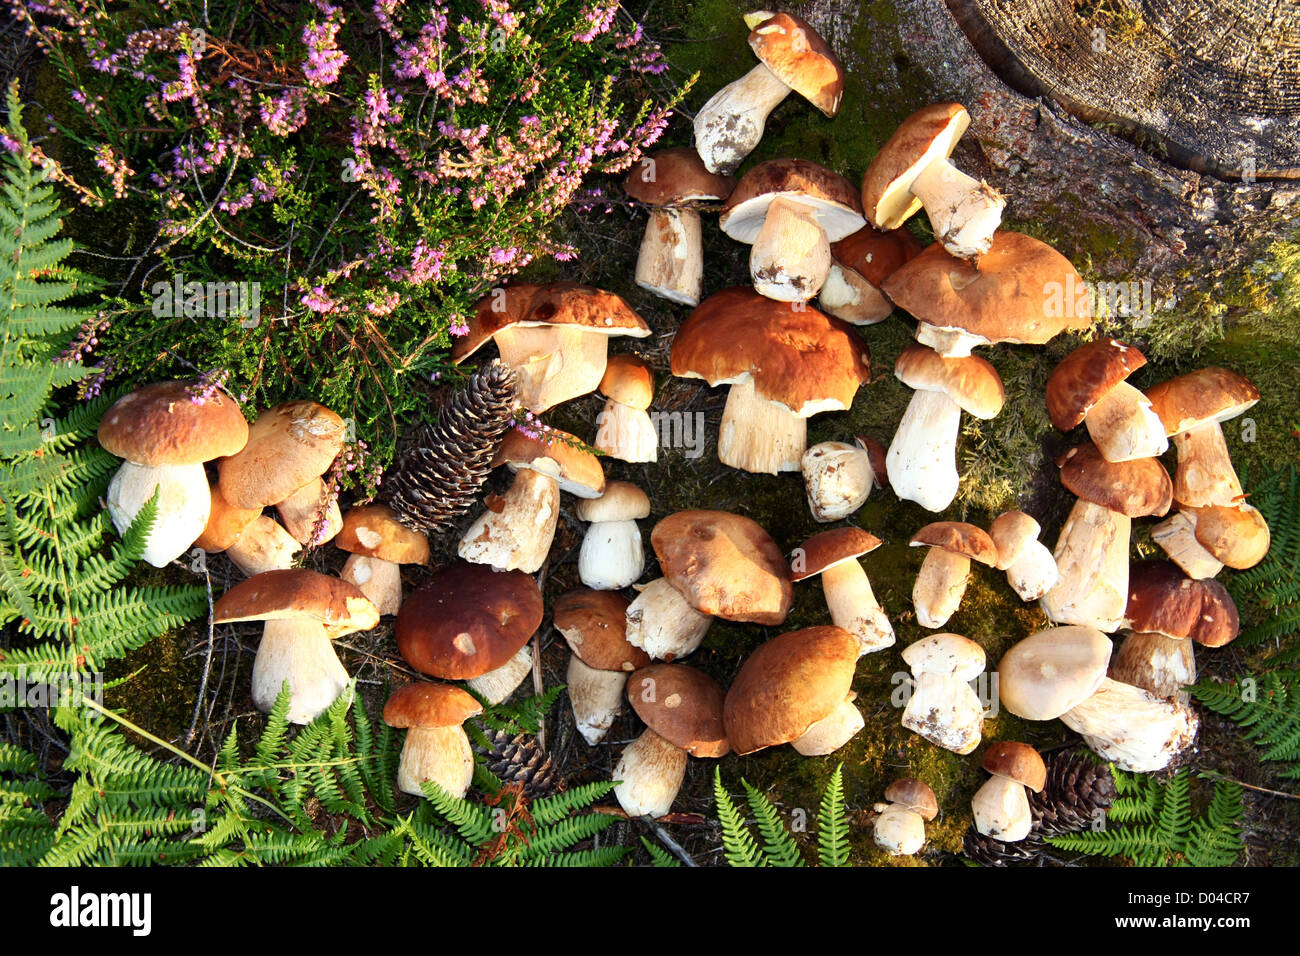 Collect of mushrooms in the forest in belgium Stock Photo